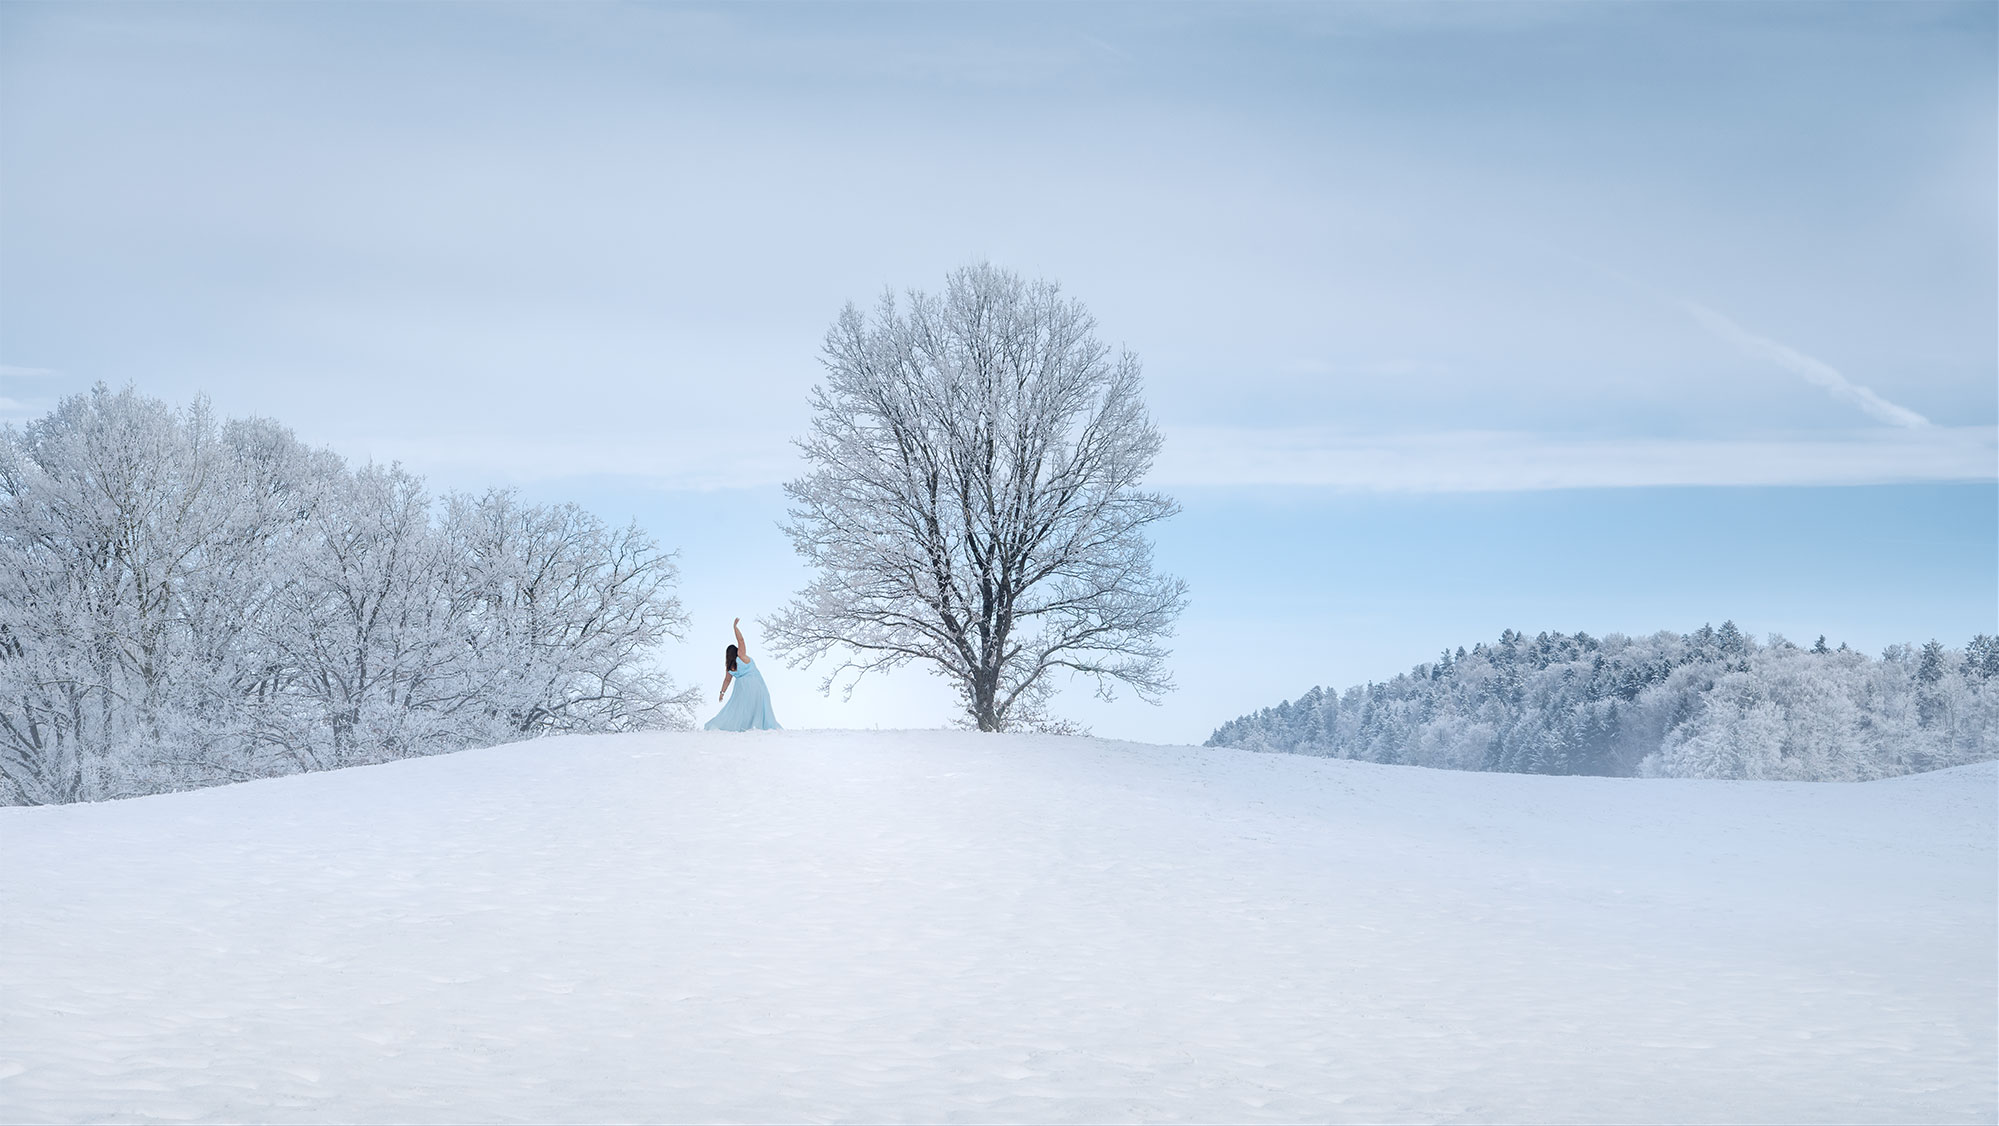 Immerse yourself in the captivating world of Swiss landscape photographer Jennifer Esseiva with this autoportrait. Adorned in a flowing ice-blue dress, she celebrates body positivity against the serene snowy backdrop of Canton Fribourg. Witness the magic of a lone frost-covered tree, standing as a symbol of resilience and beauty in the wintry countryside.